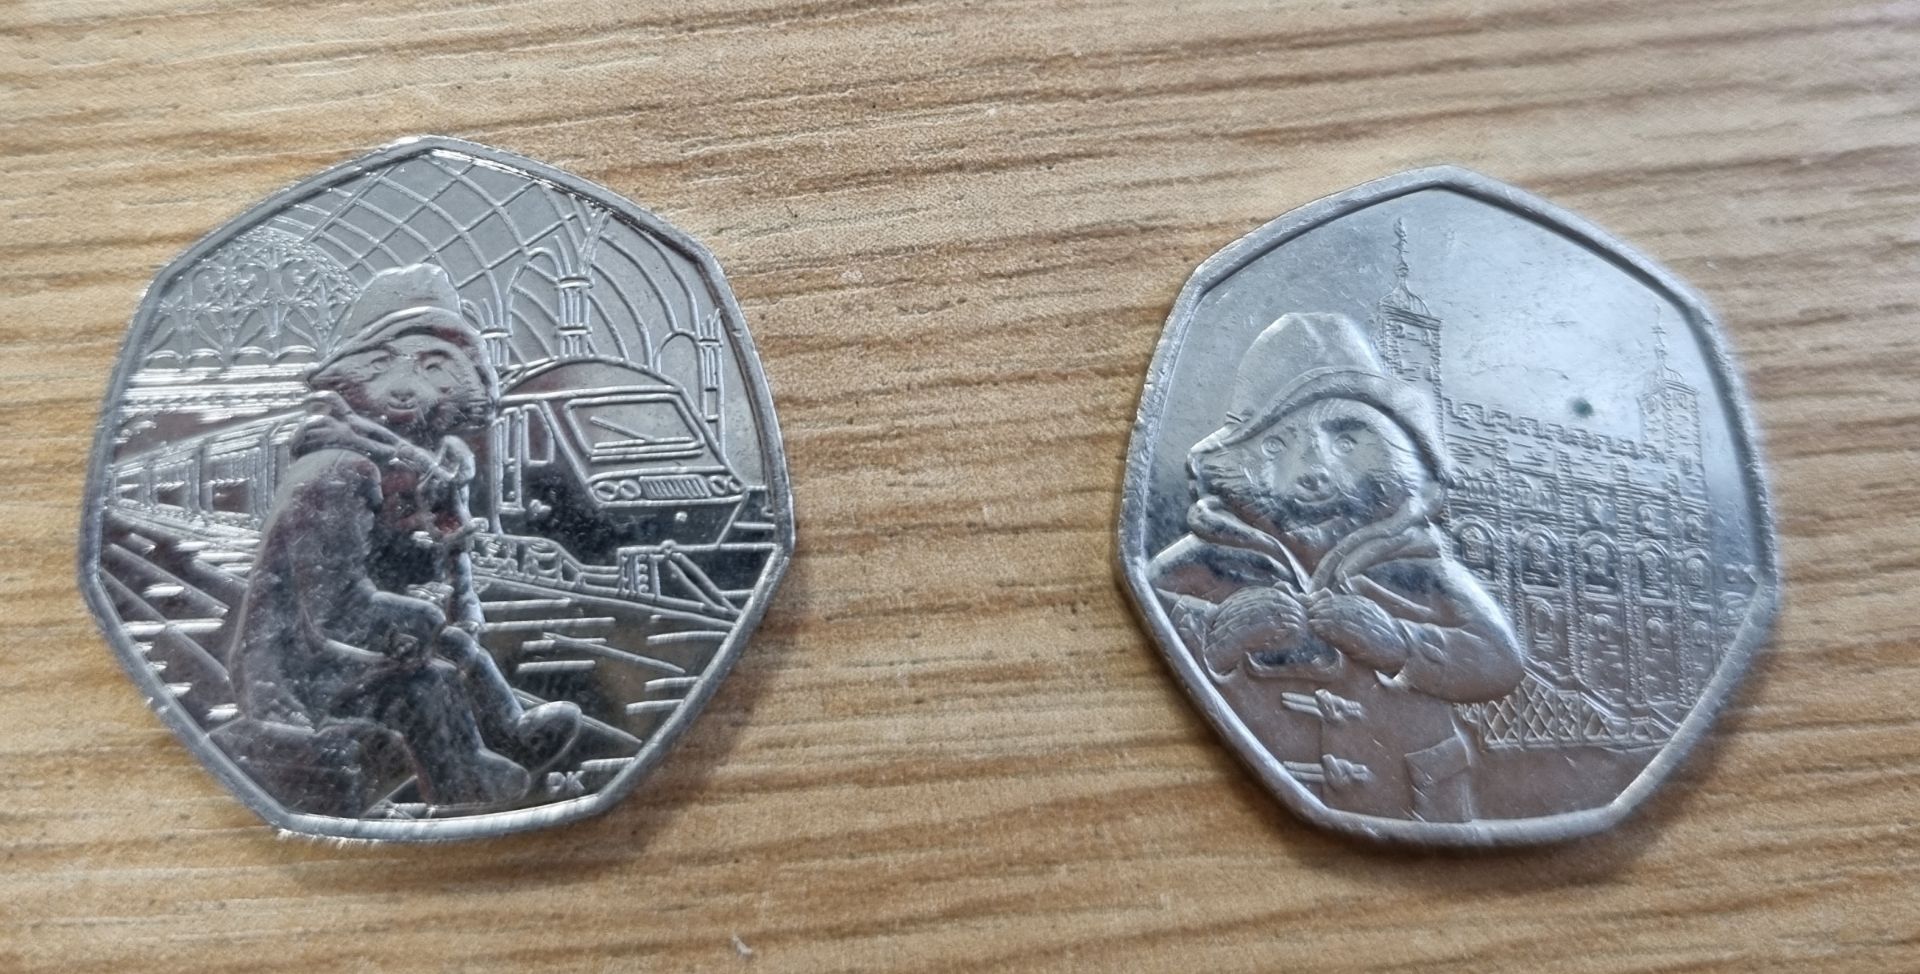 Collection of collectable Paddington Bear 50p coins - Full set of 4 coins - Image 4 of 4